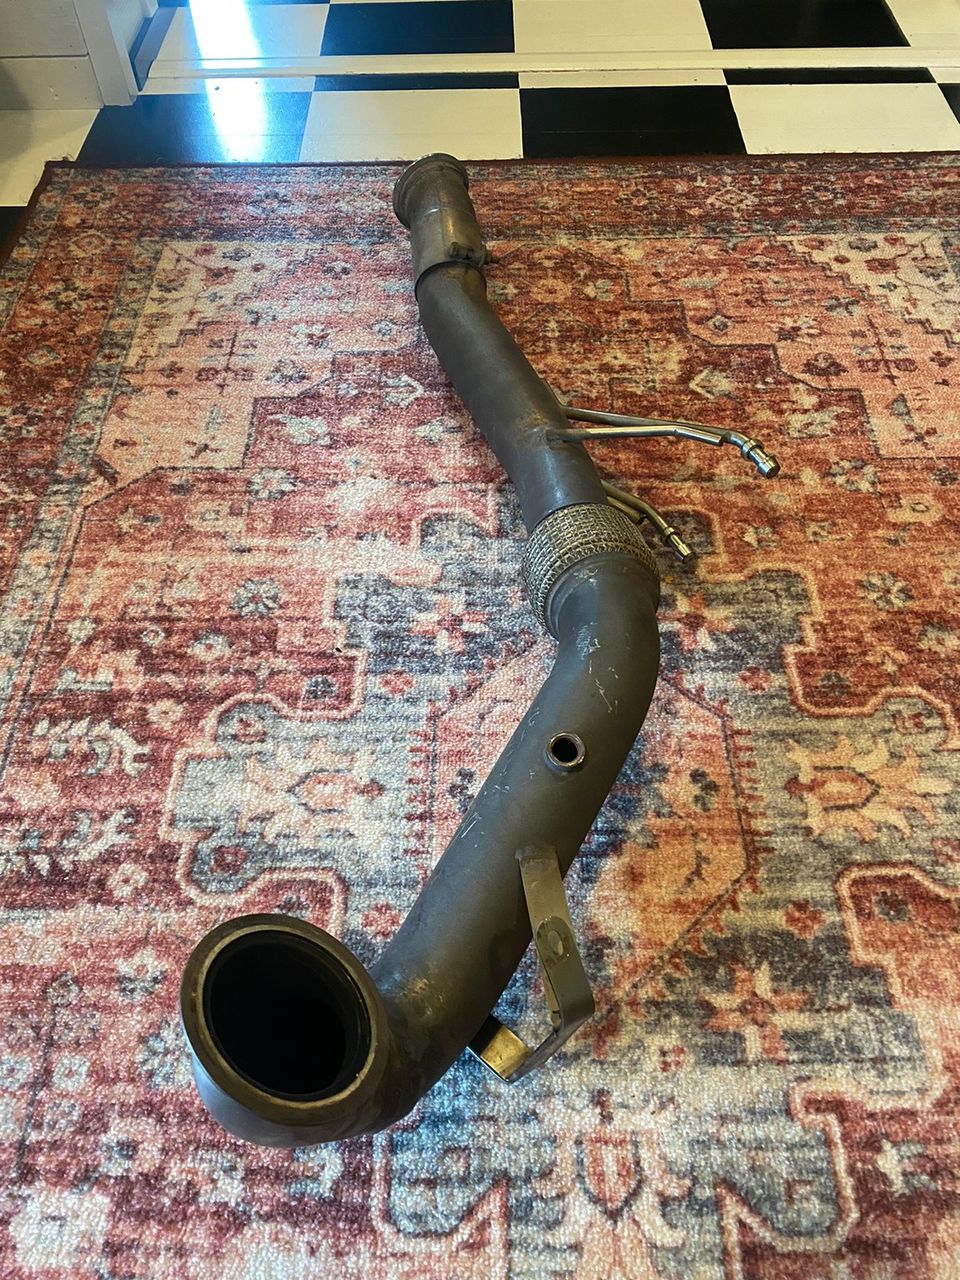 Catless Downpipe